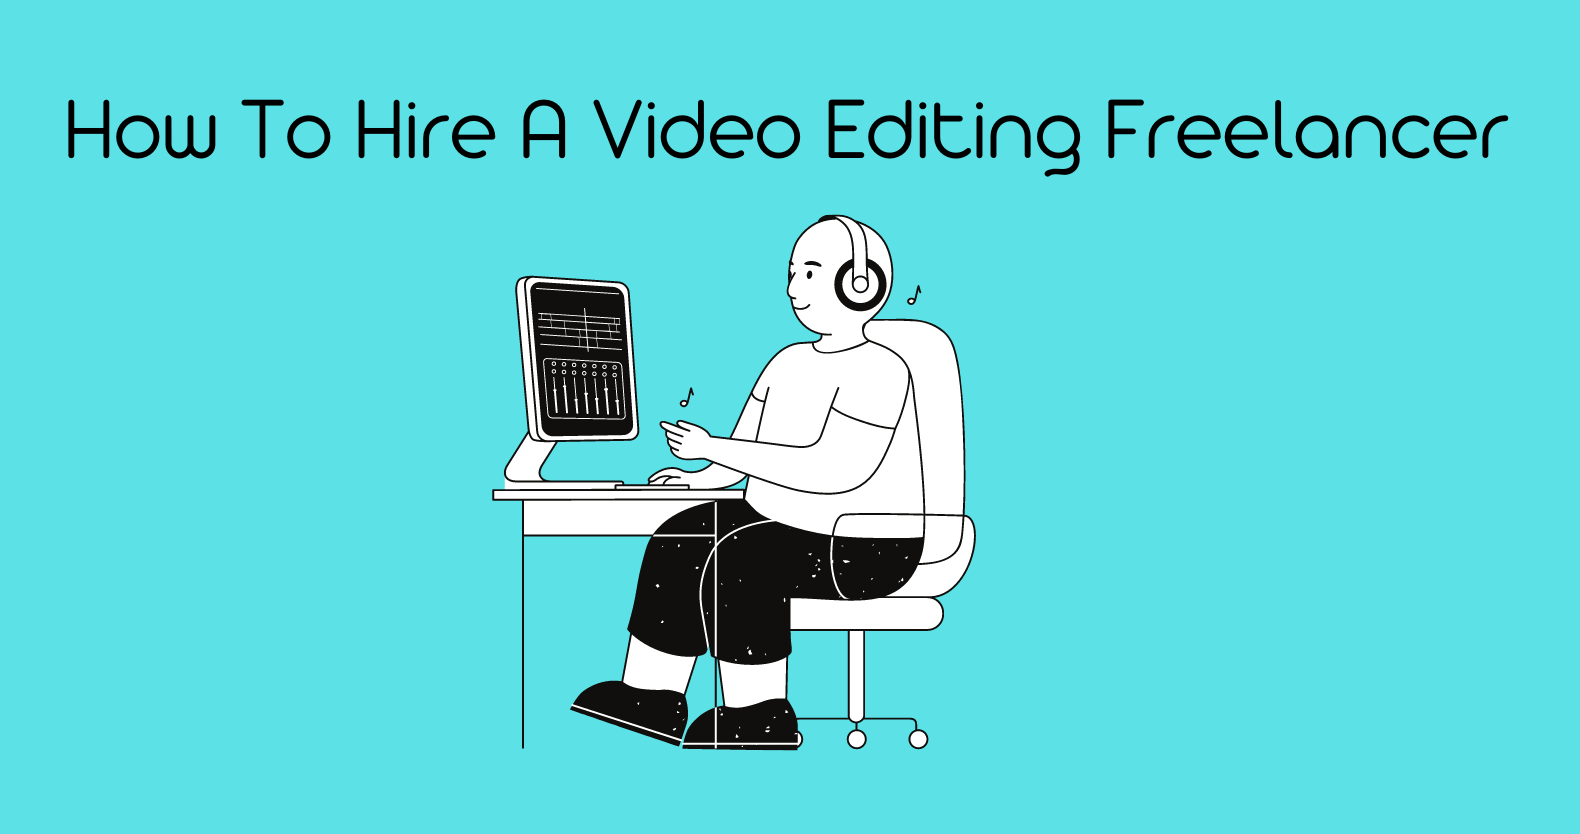 How To Hire A Video Editing Freelancer